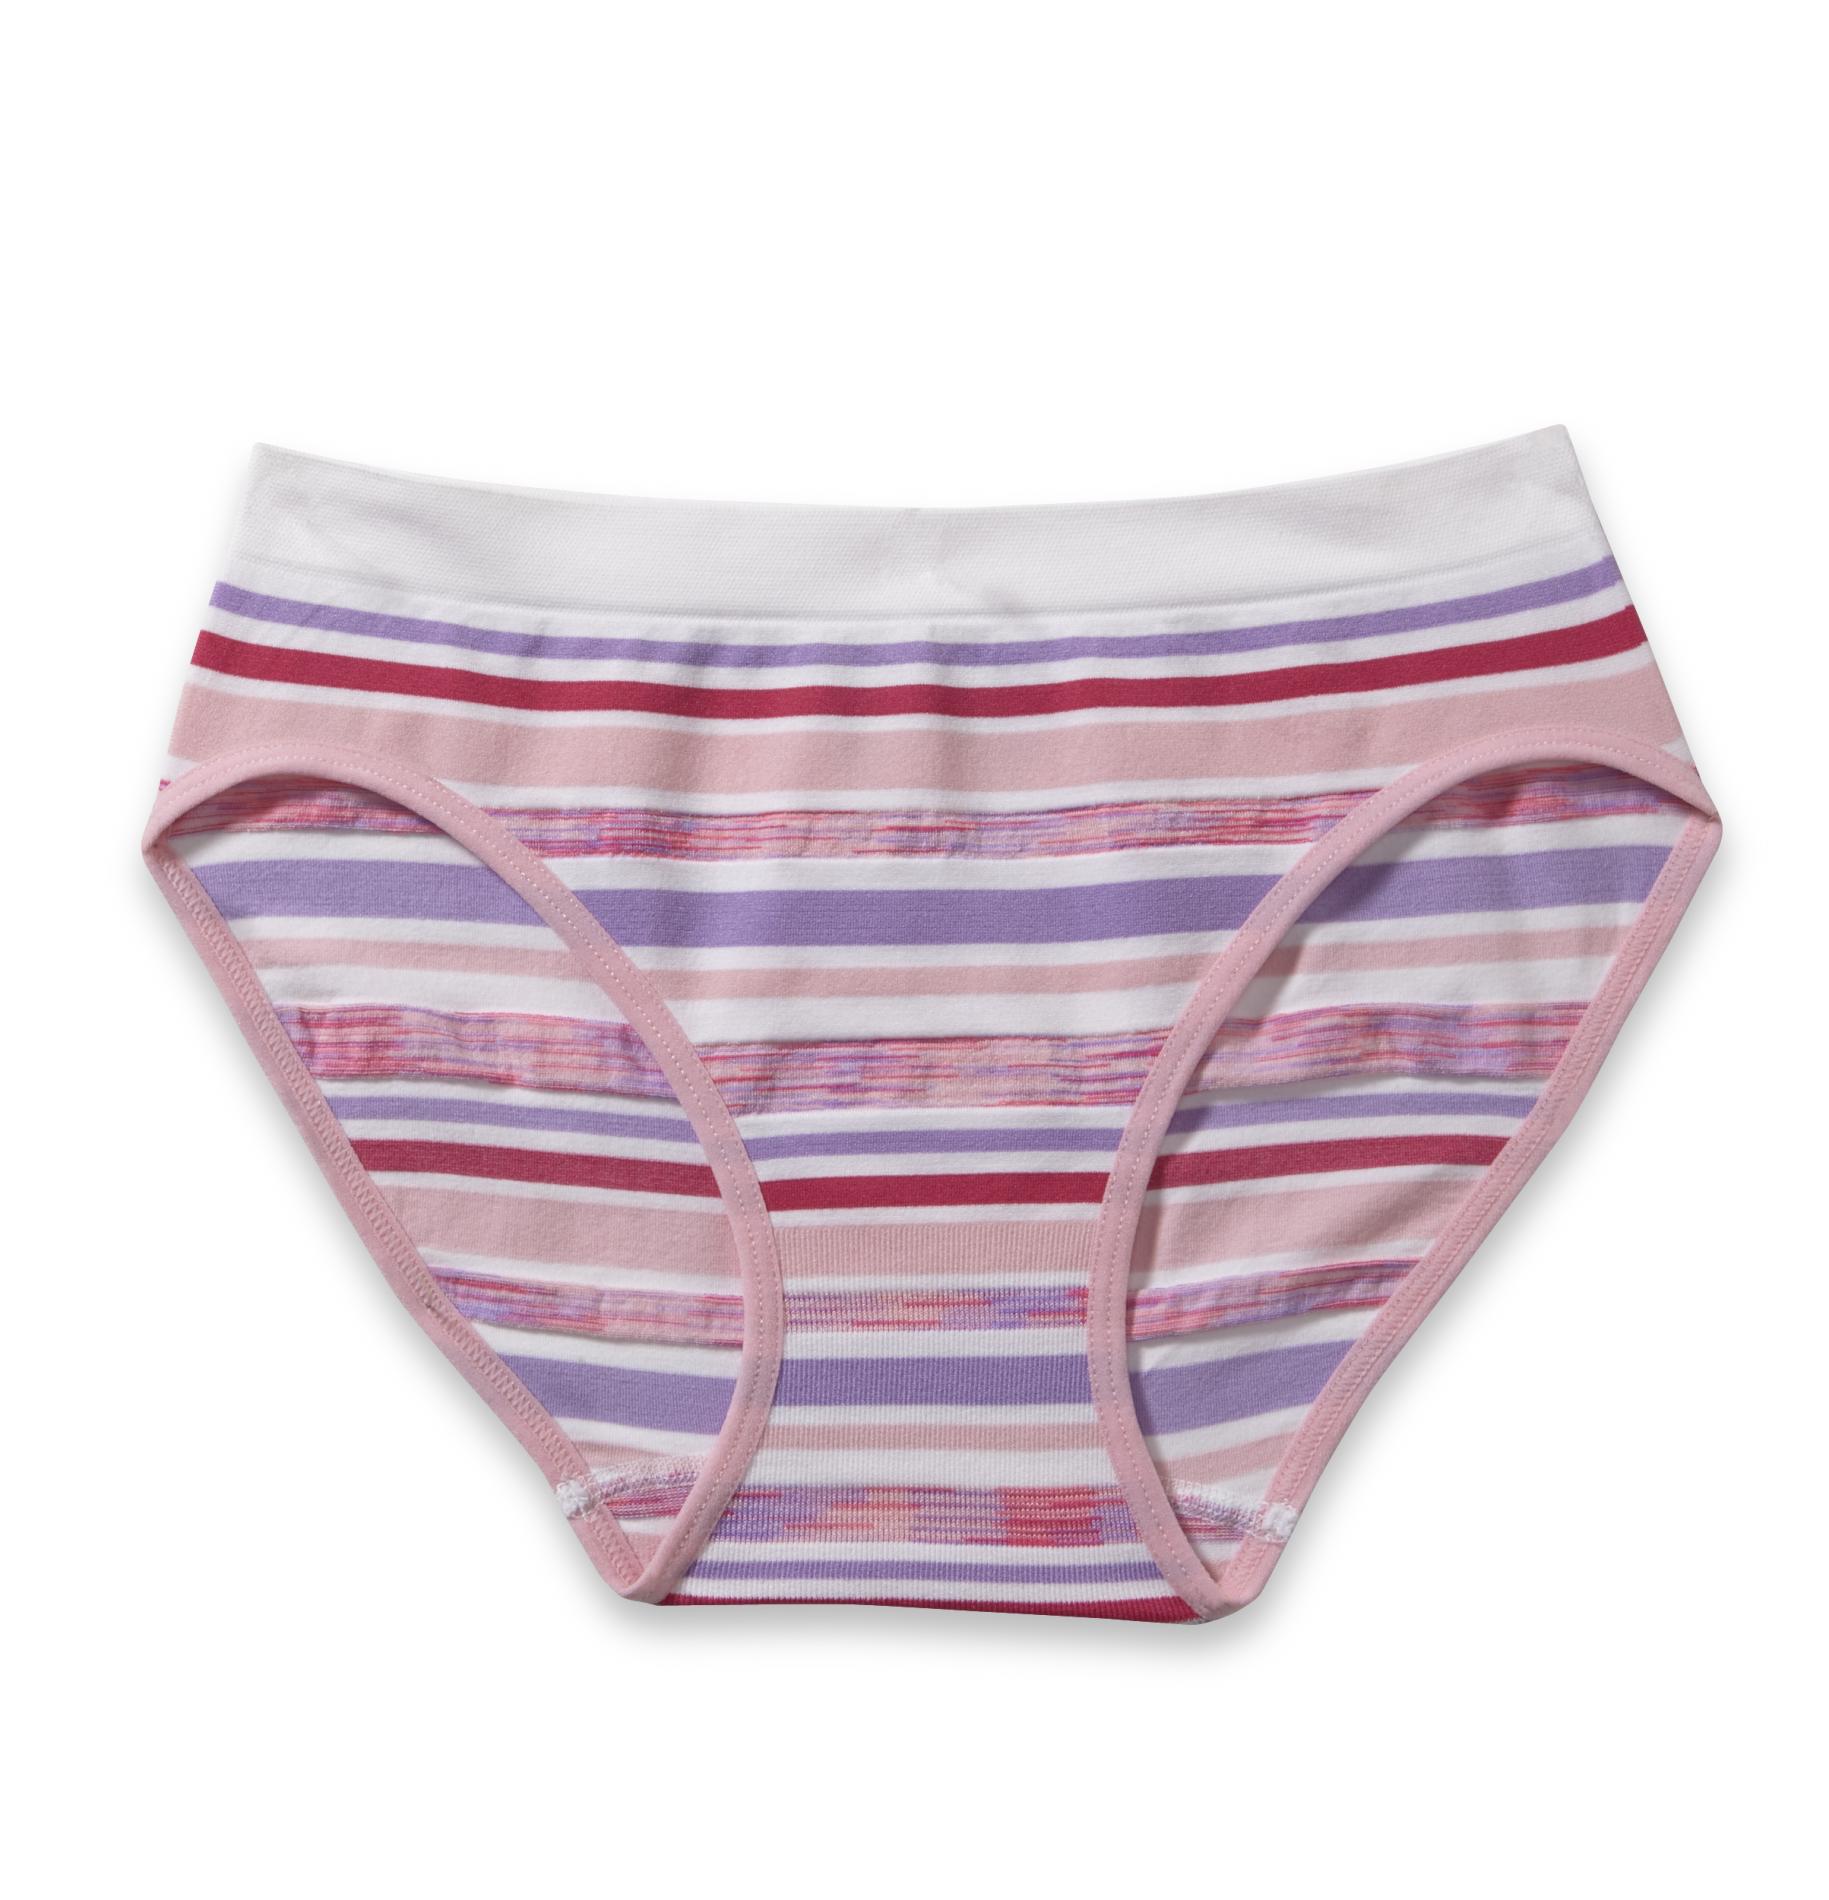 Maidenform Girl's Hipster Panties - Striped